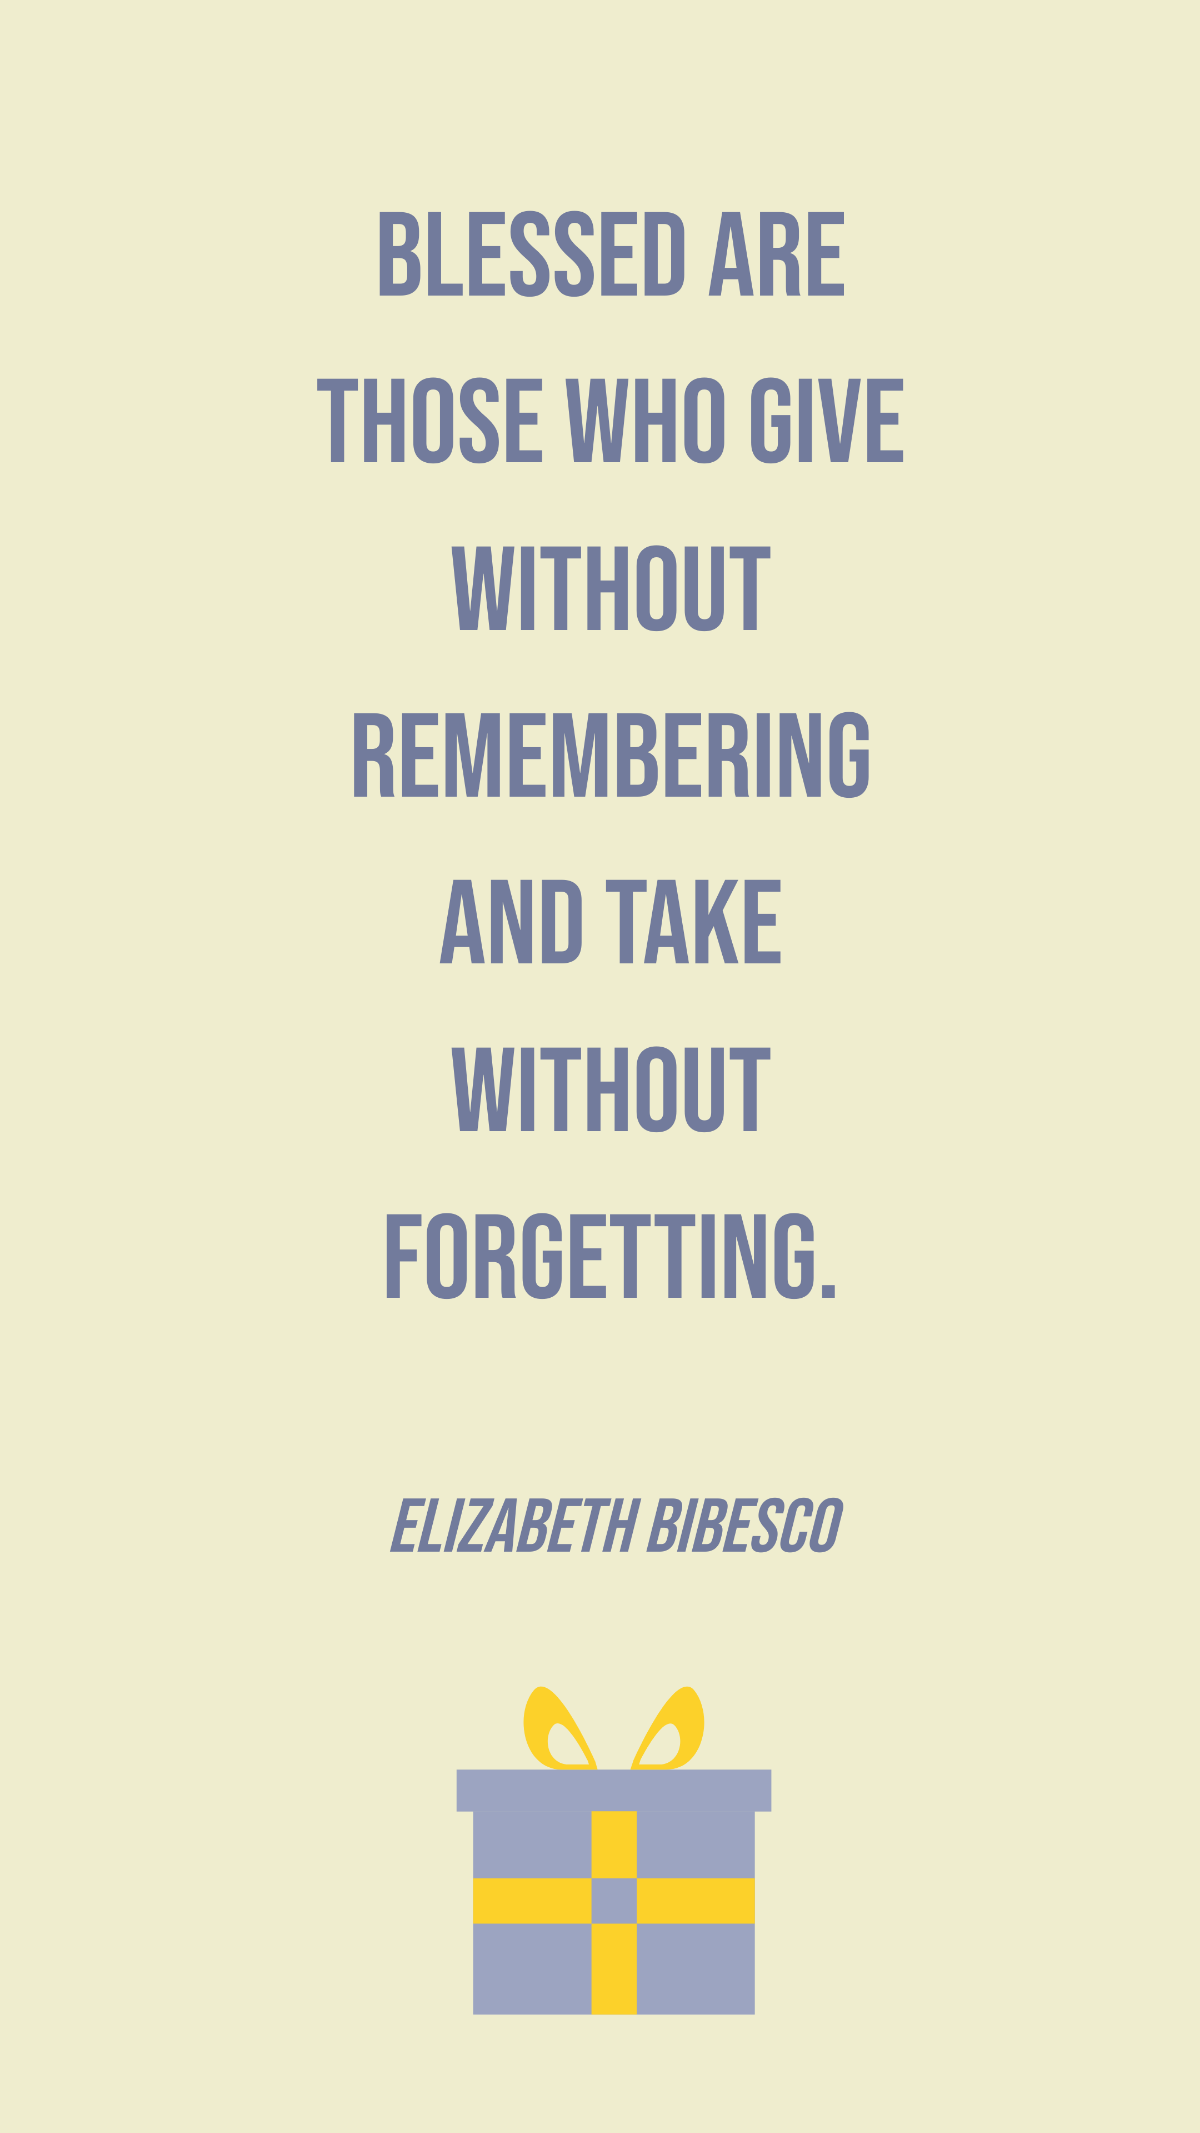 Elizabeth Bibesco - Blessed are those who give without remembering and take without forgetting. Template